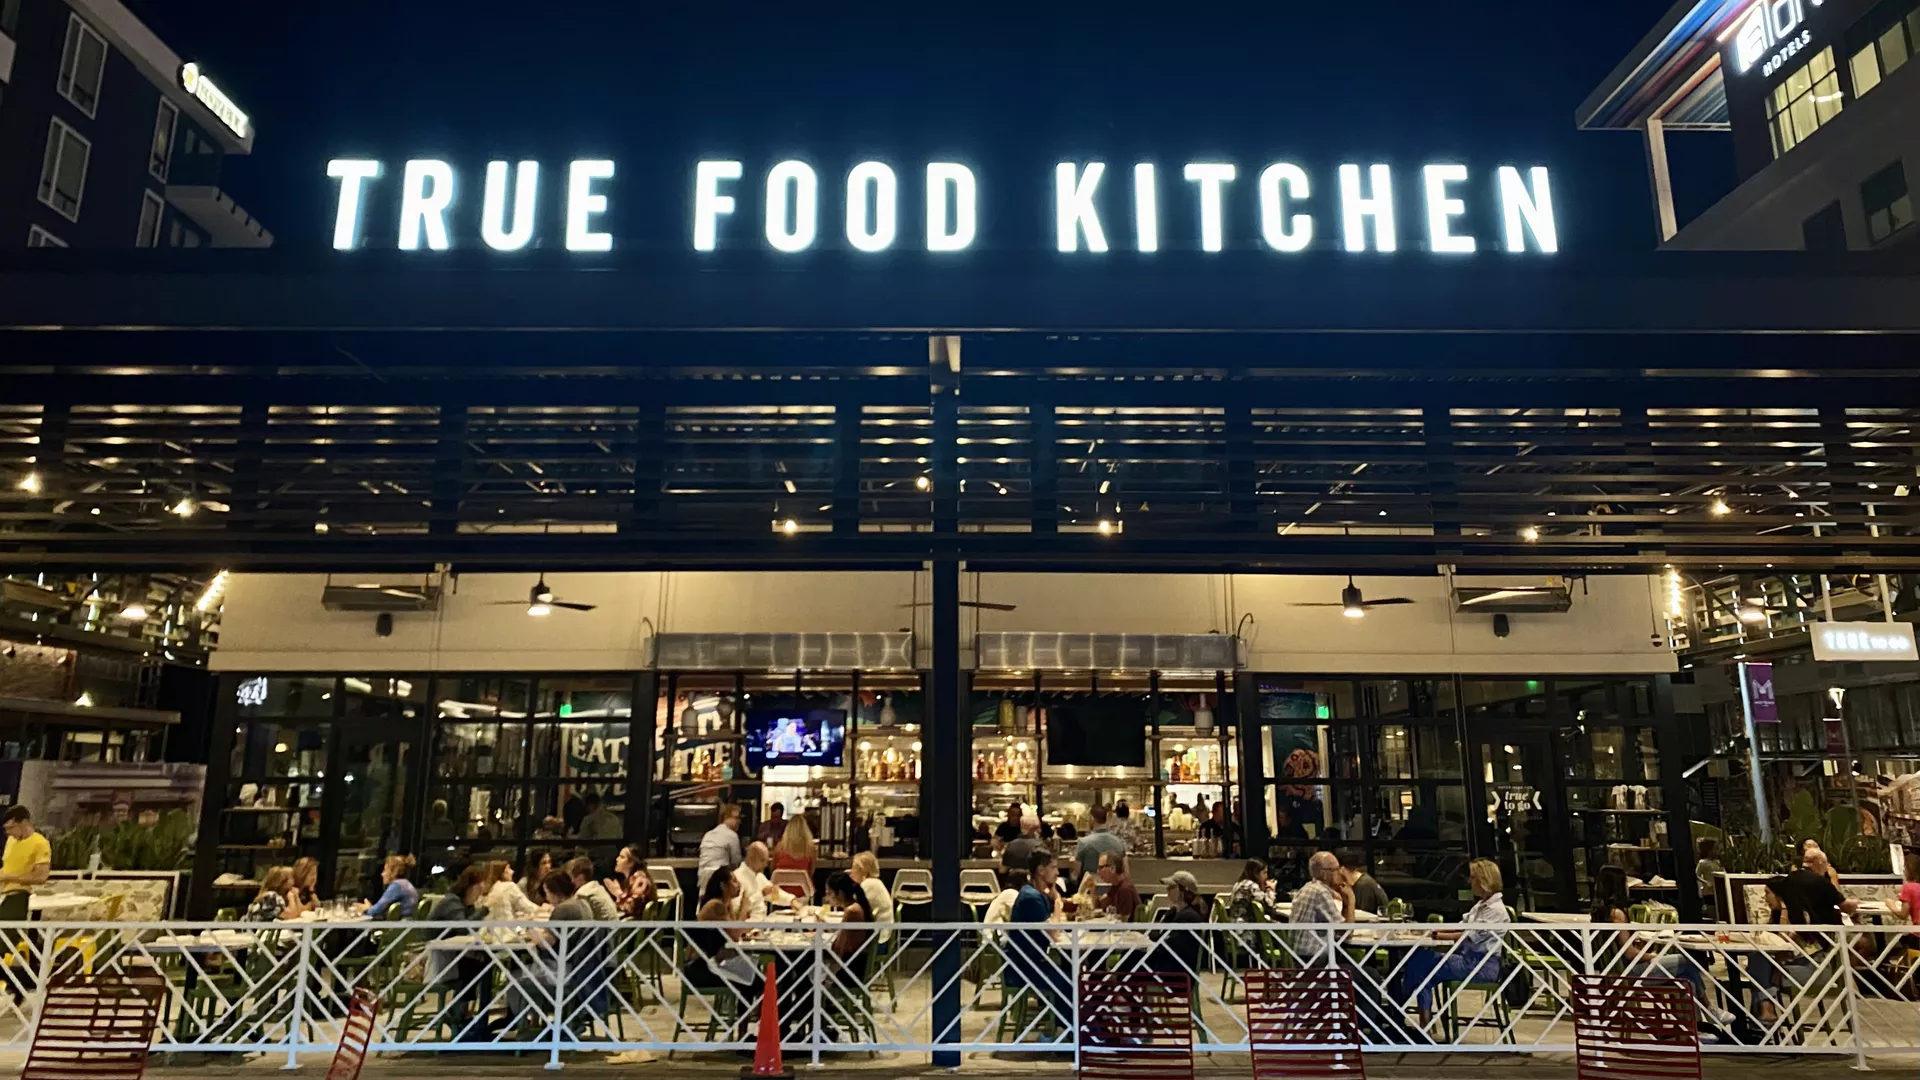 The outside of True Food Kitchen